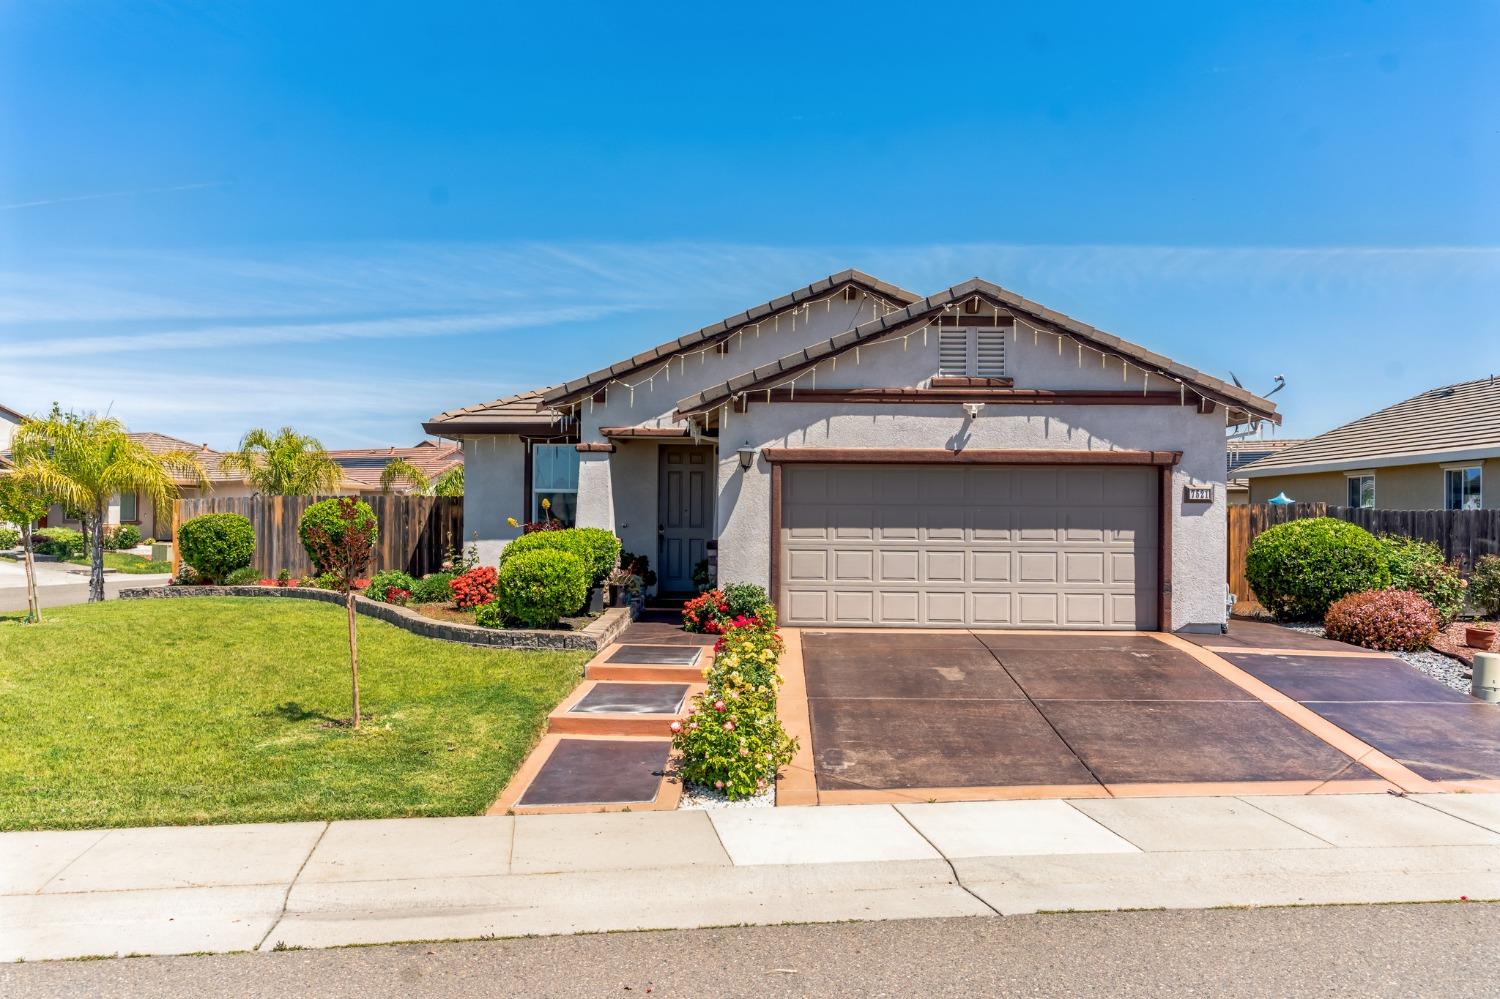 Welcome Home. This Lennar Home 1 story 3BR 2Bath shows very well located in a huge corner lot. This 